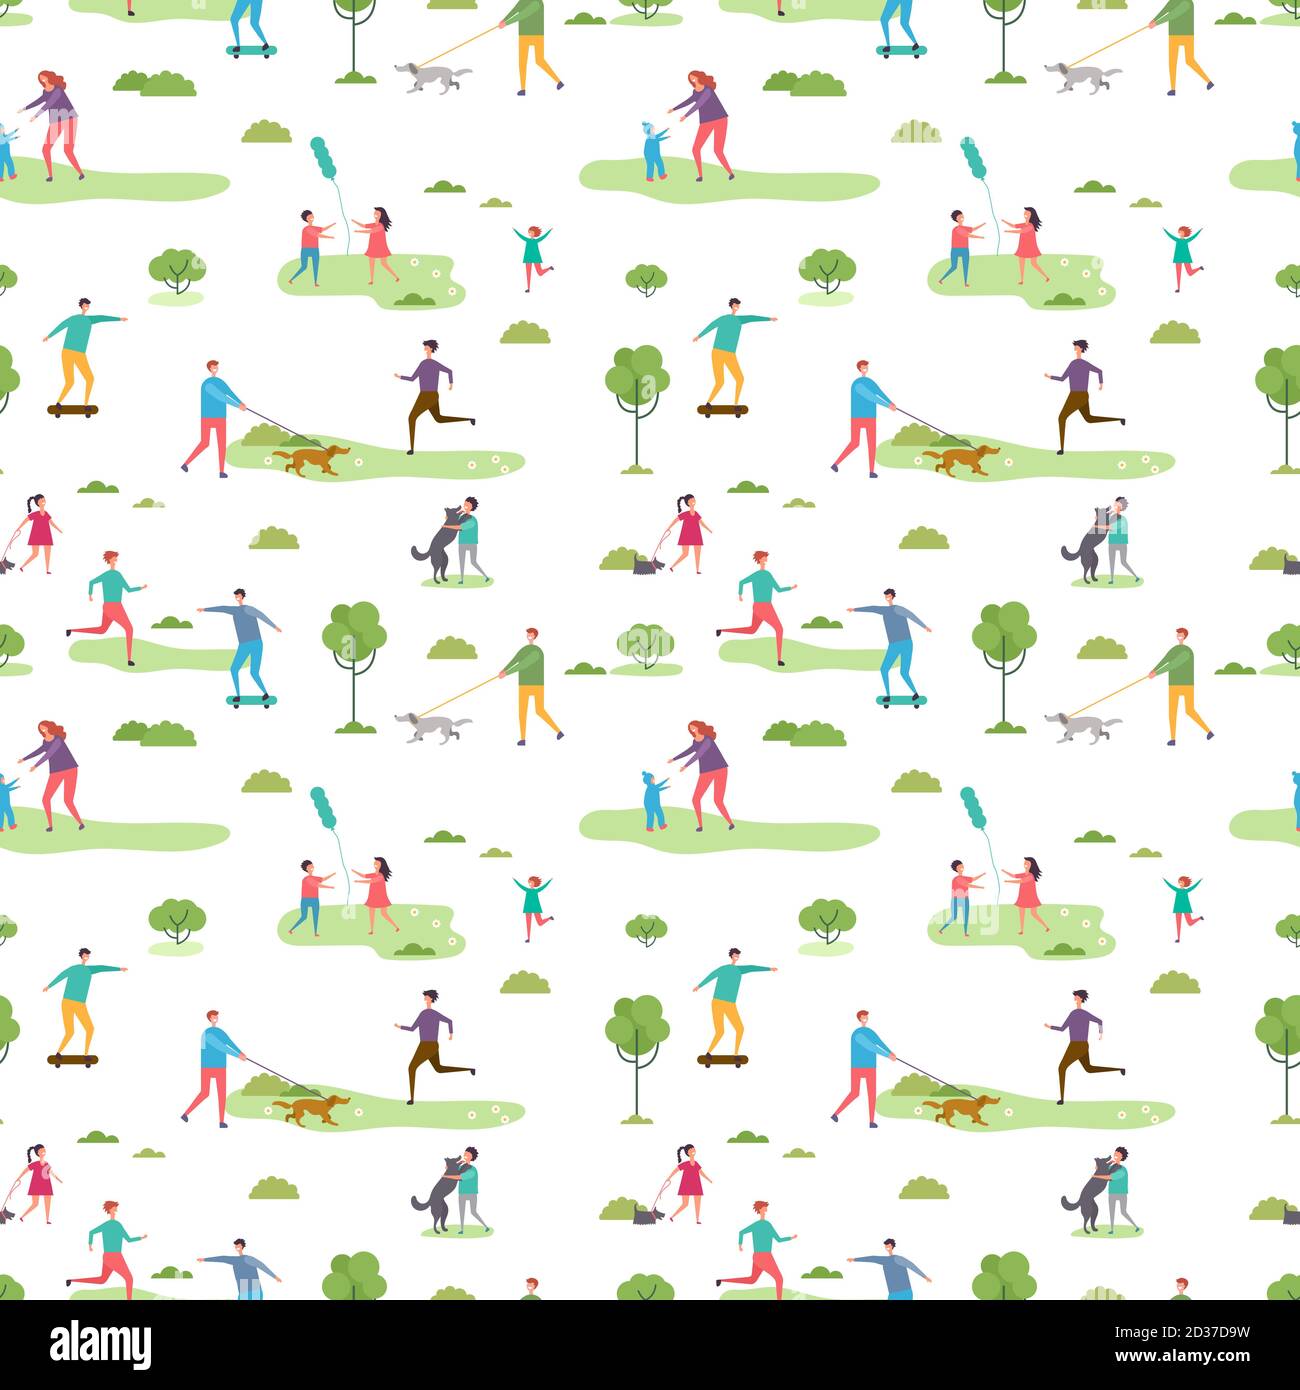 Outdoor activity seamless pattern. Cartoon characters walking peoples and kids vector illustration Stock Vector